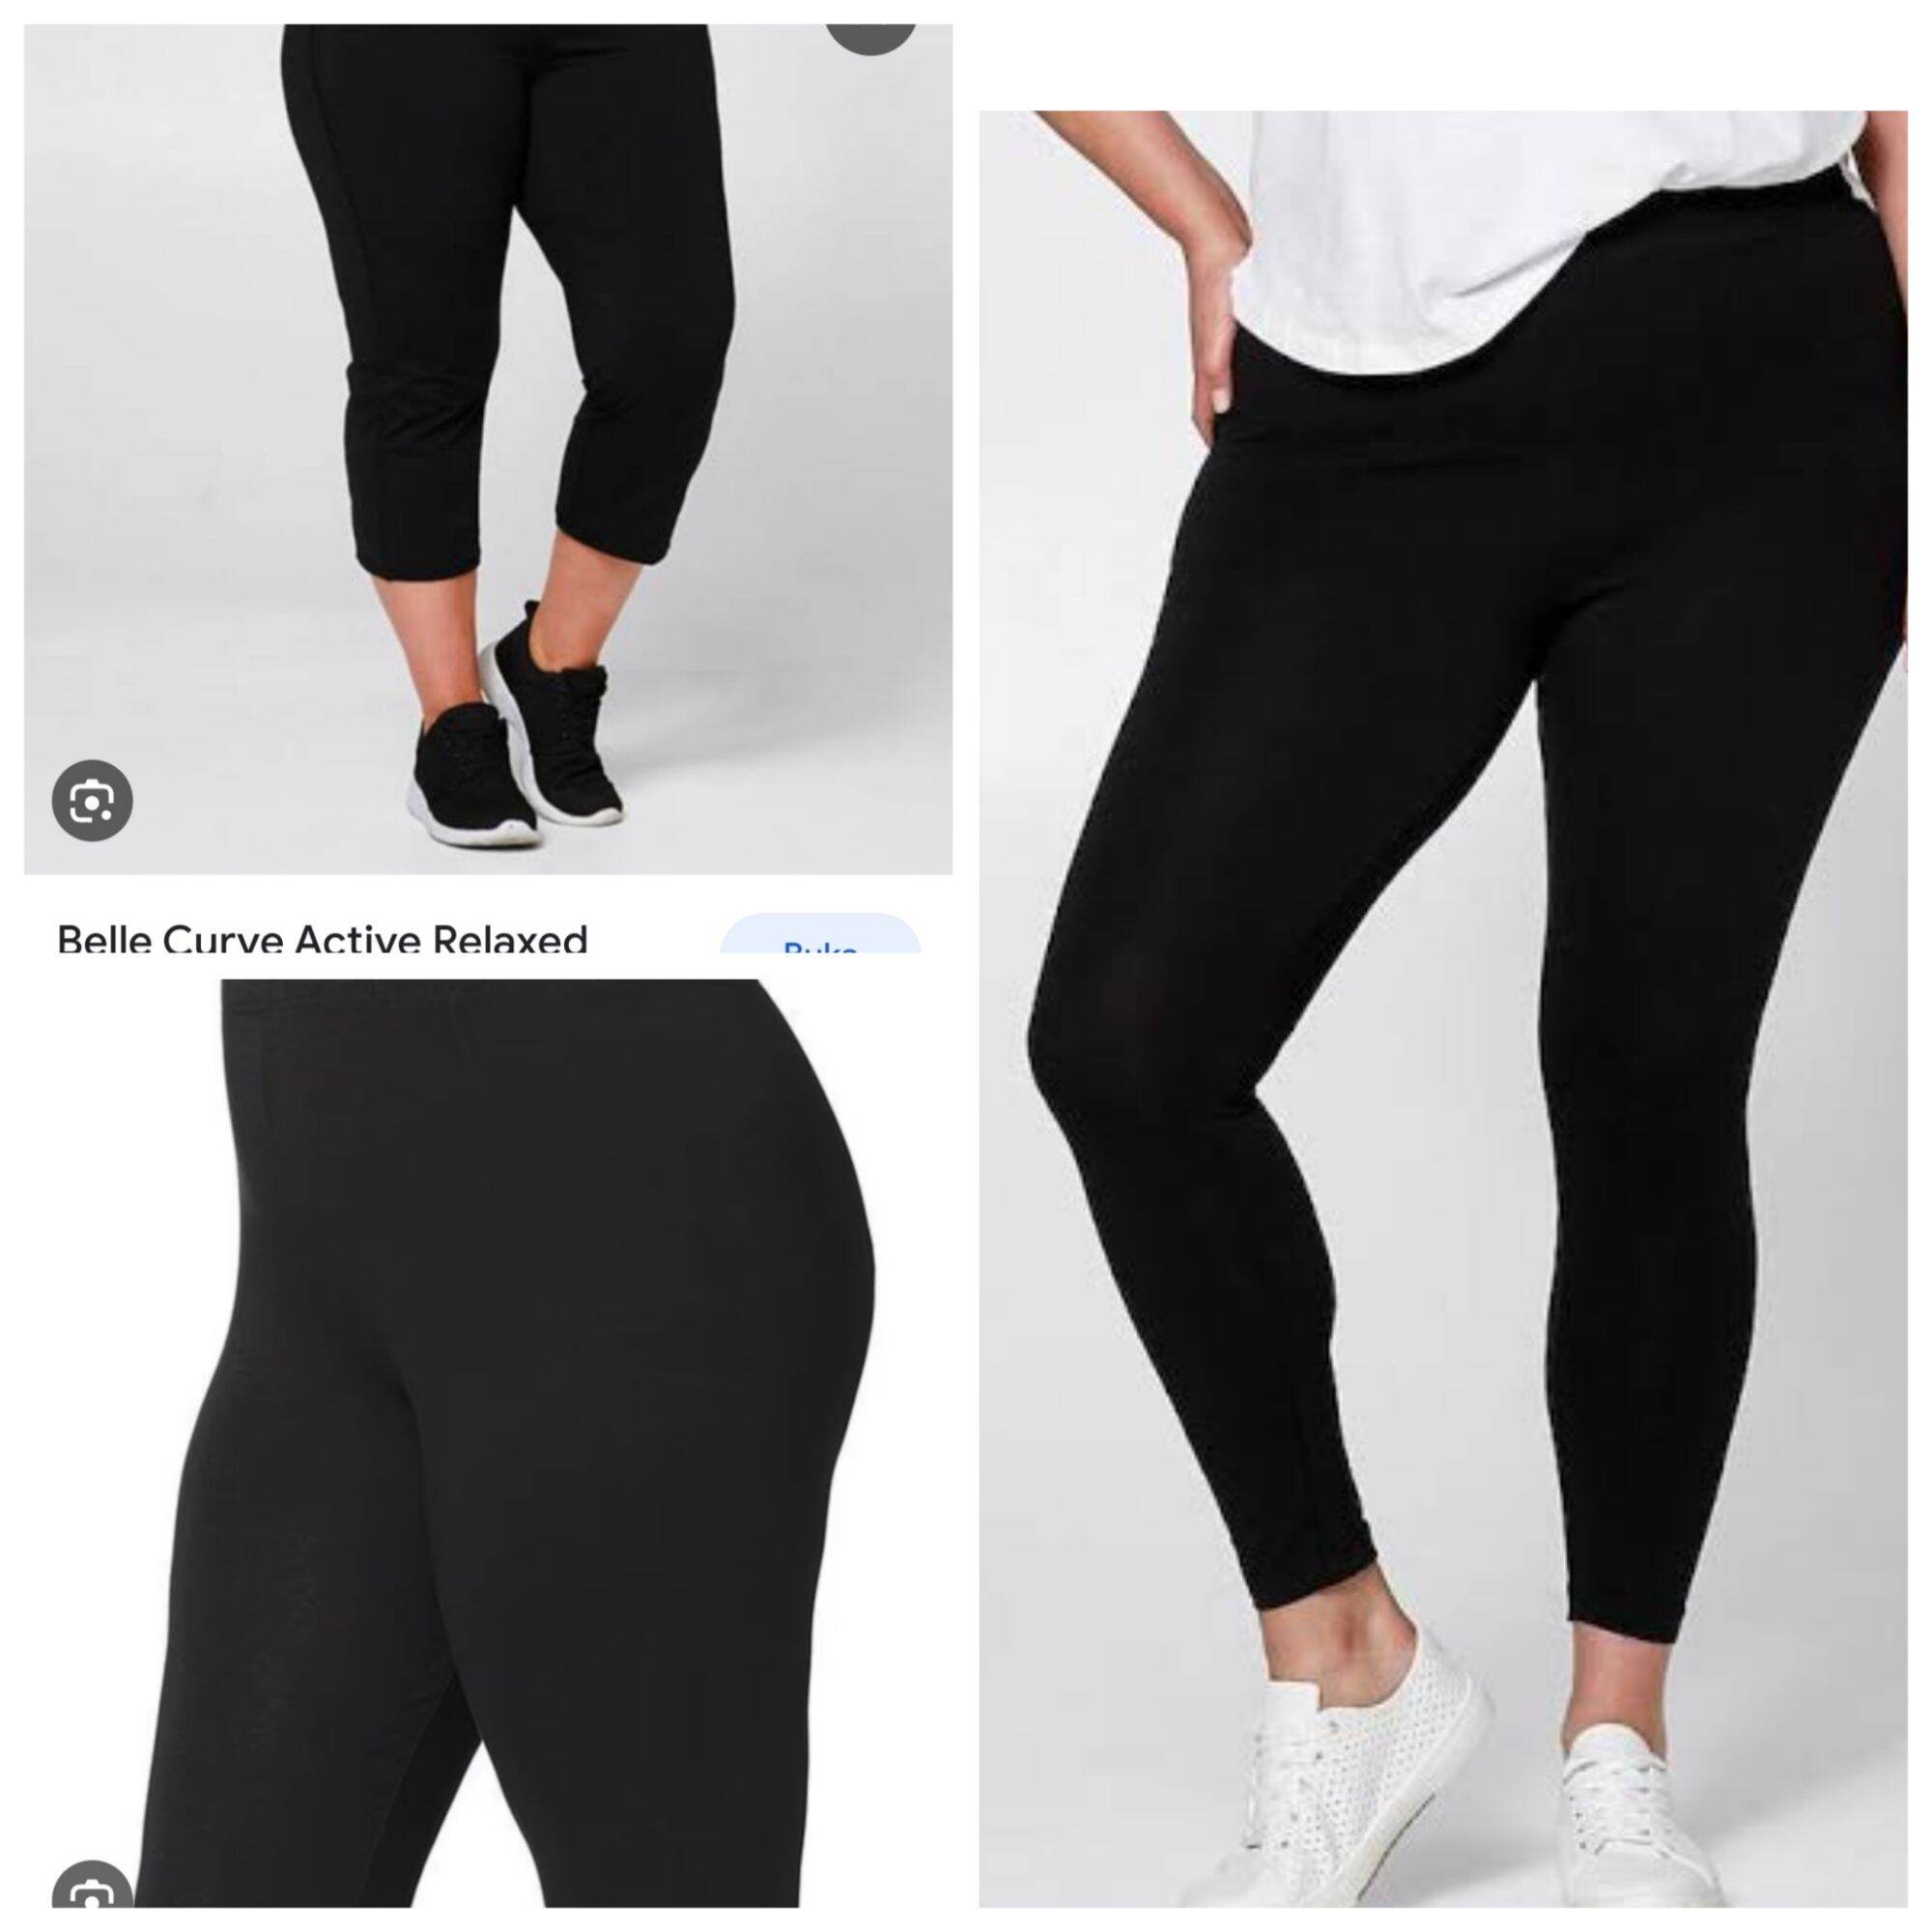 Belle Curve Active Relaxed Leggings